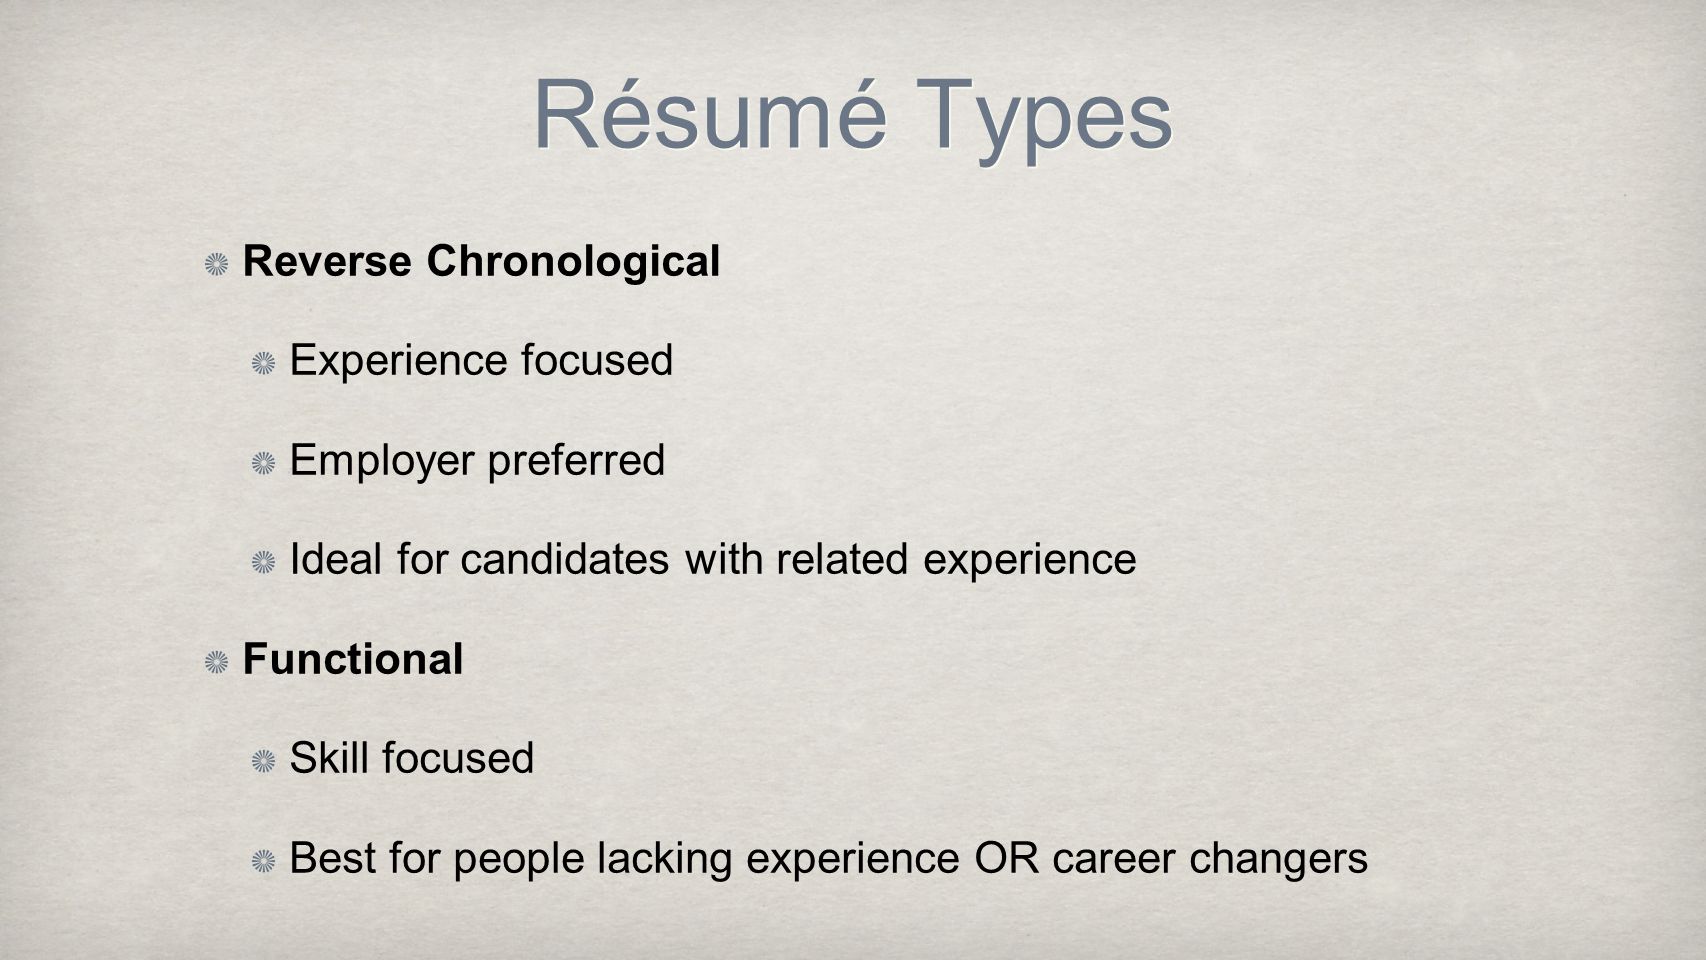 Résumé Types Reverse Chronological Experience focused Employer preferred Ideal for candidates with related experience Functional Skill focused Best for people lacking experience OR career changers